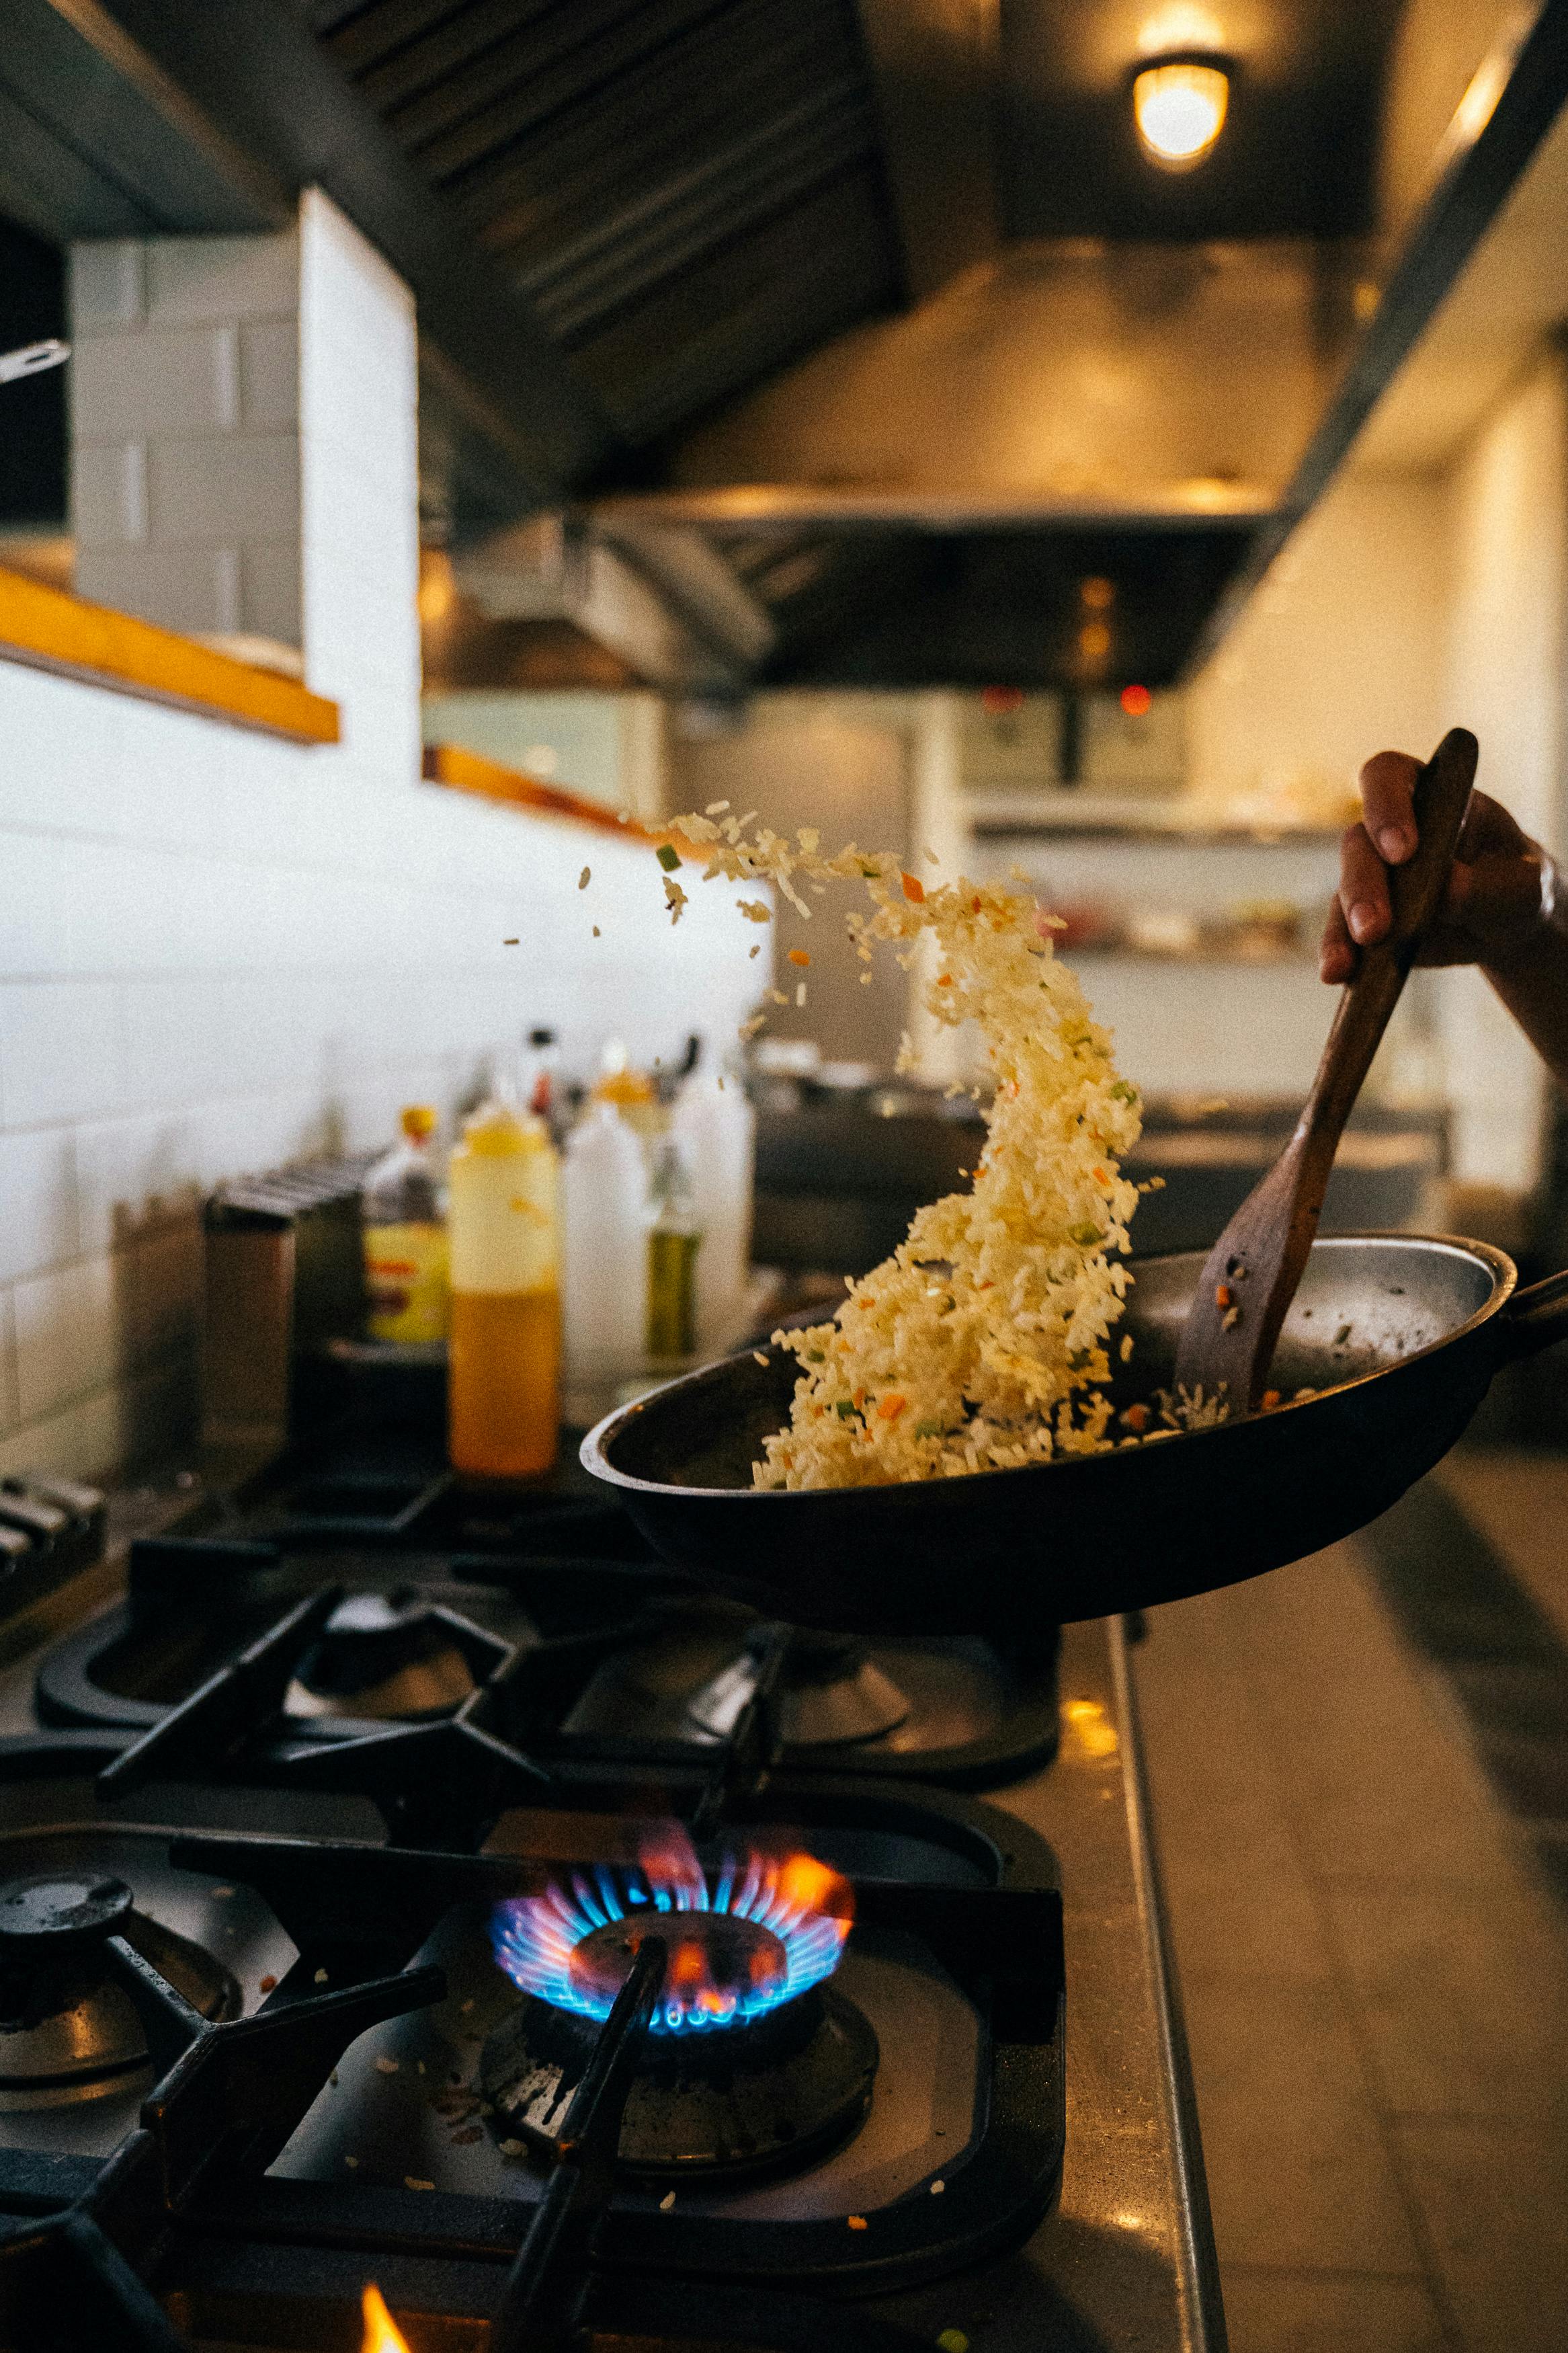 A person cooking in the kitchen | Source: Pexels